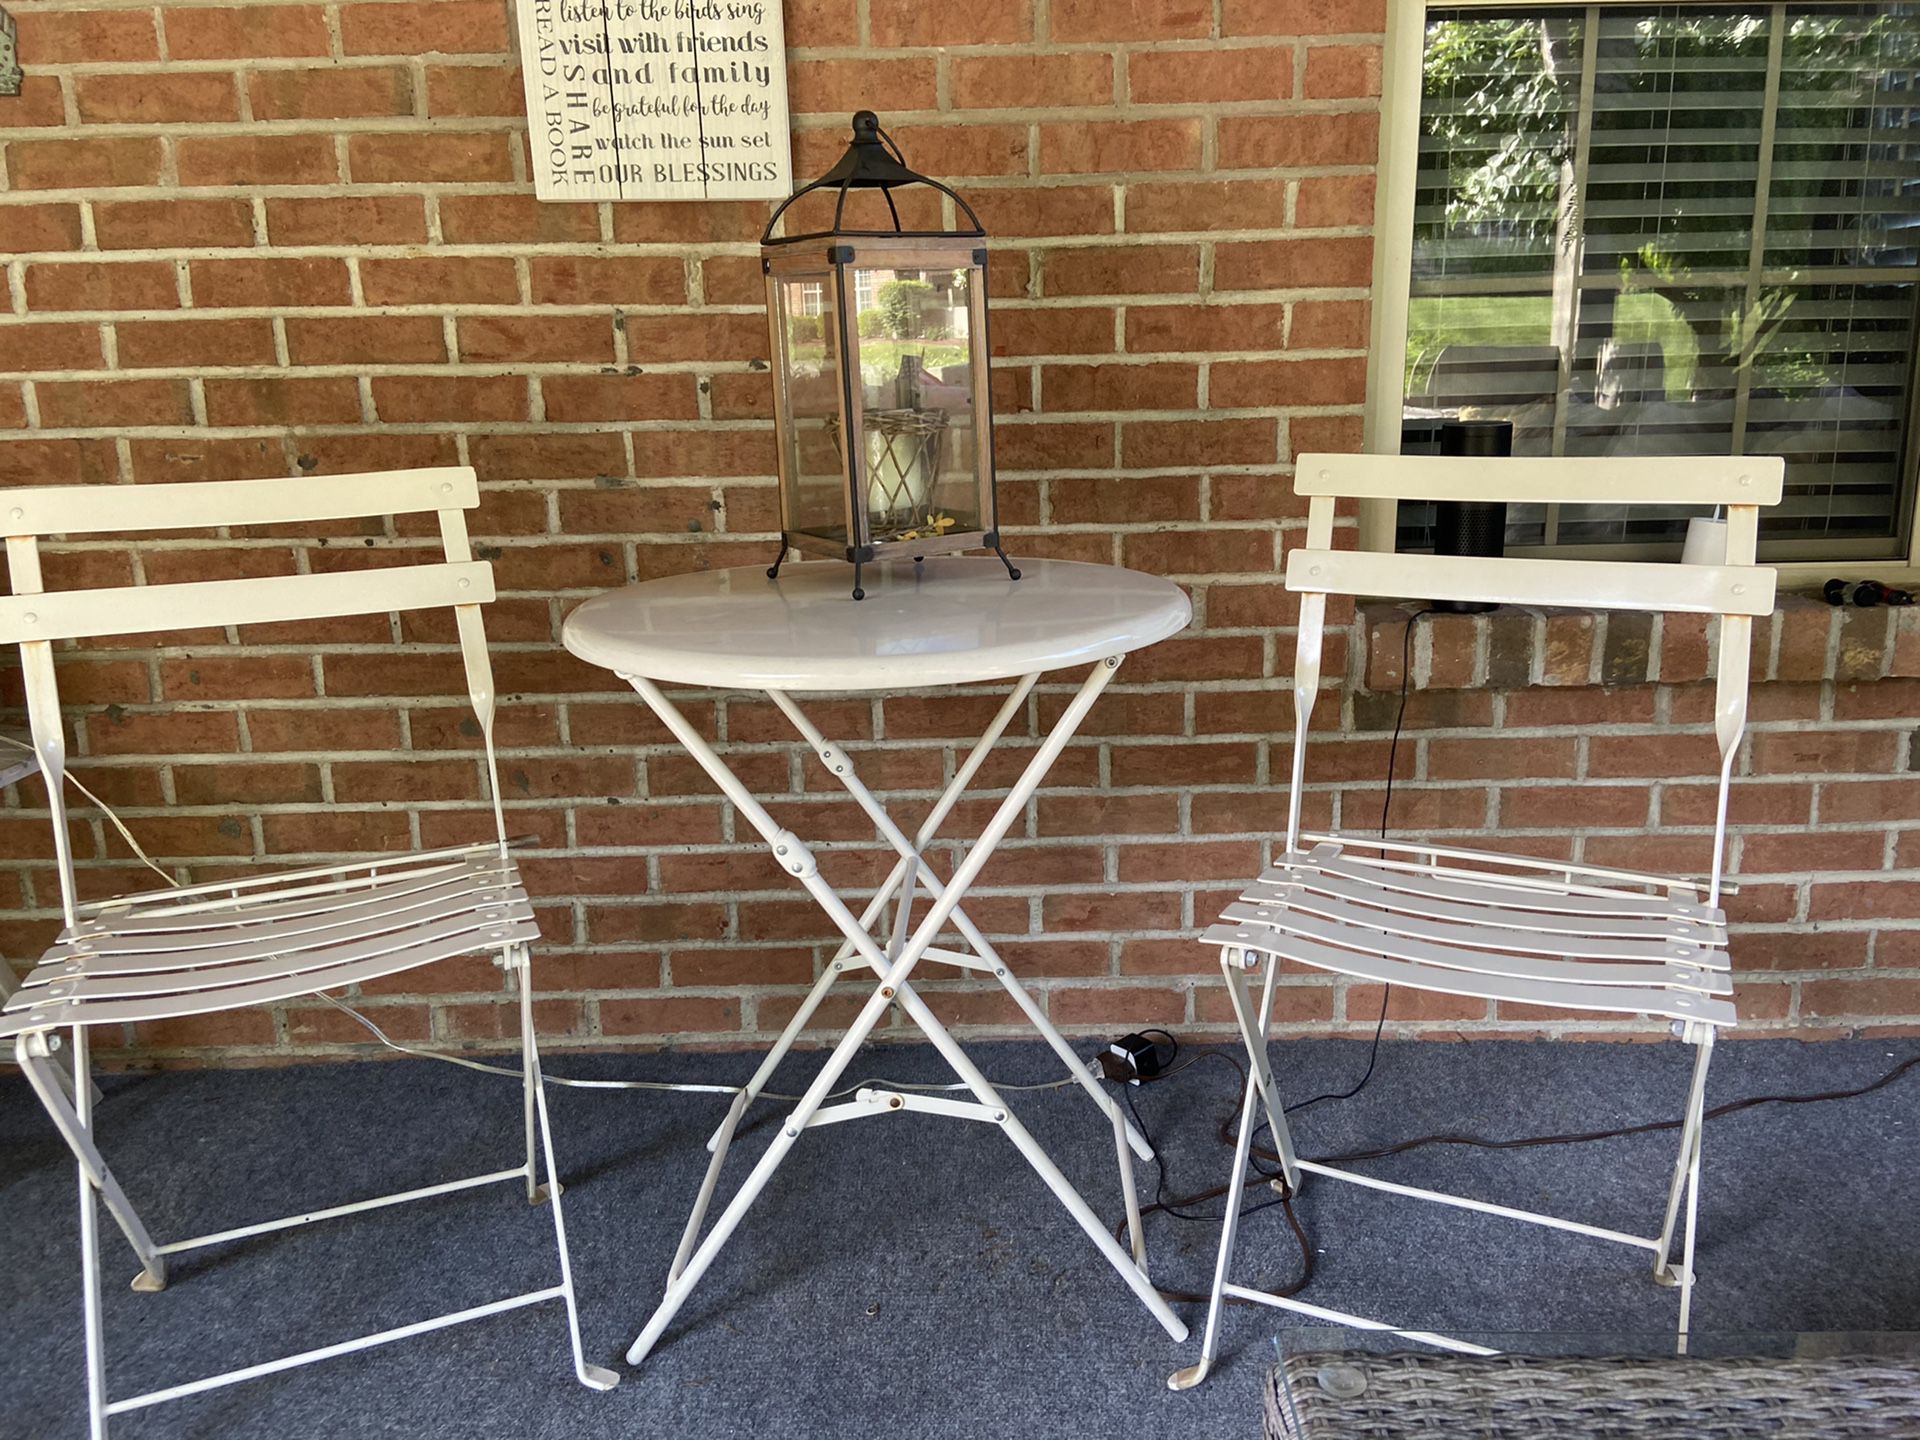 Outdoor table & chairs, does not include accessories